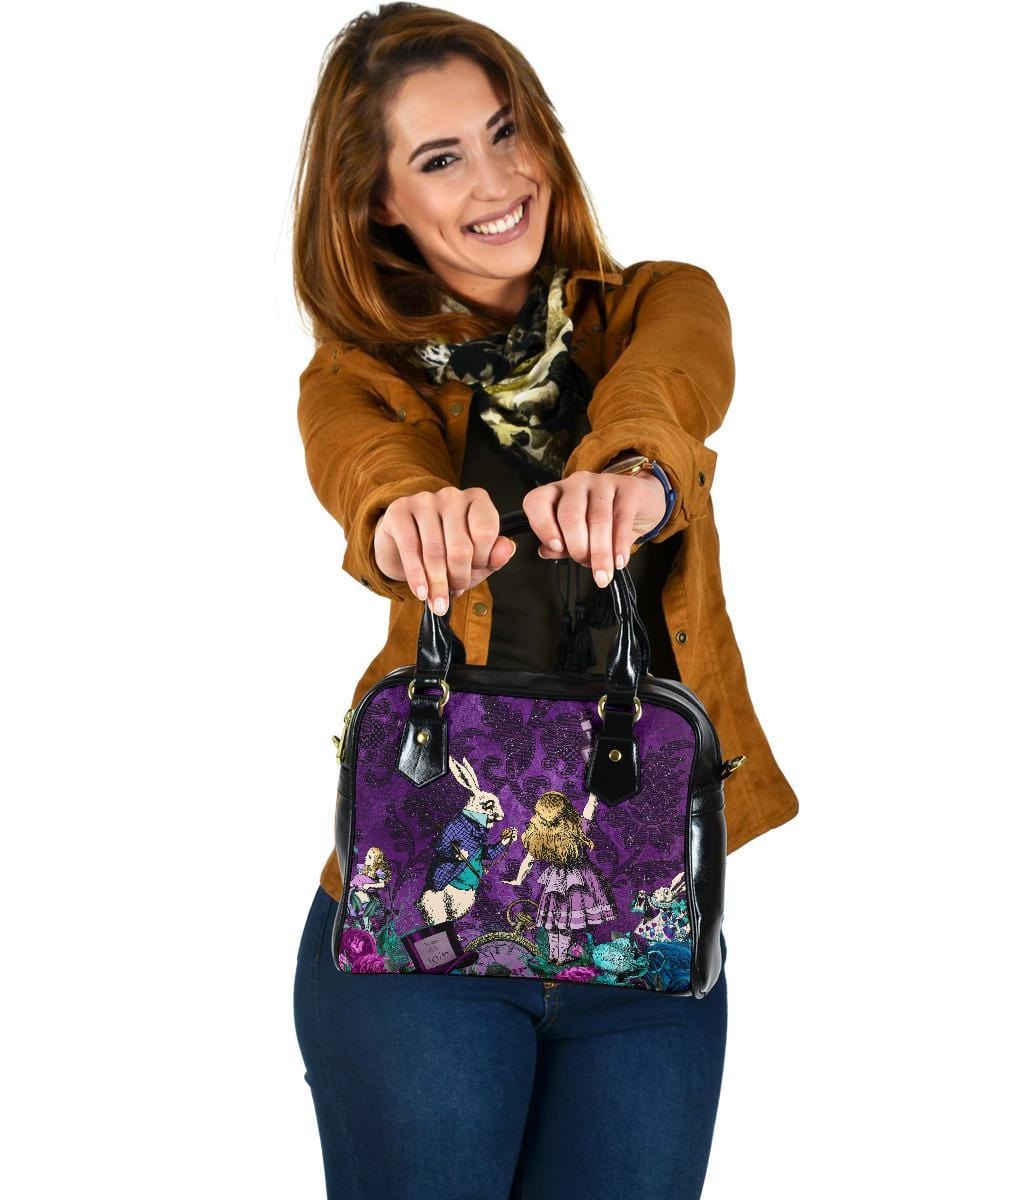 smiling Australian woman showing the viewer her new Gothic cute Alice in Wonderland vegan handbag on a purple damask pattern background